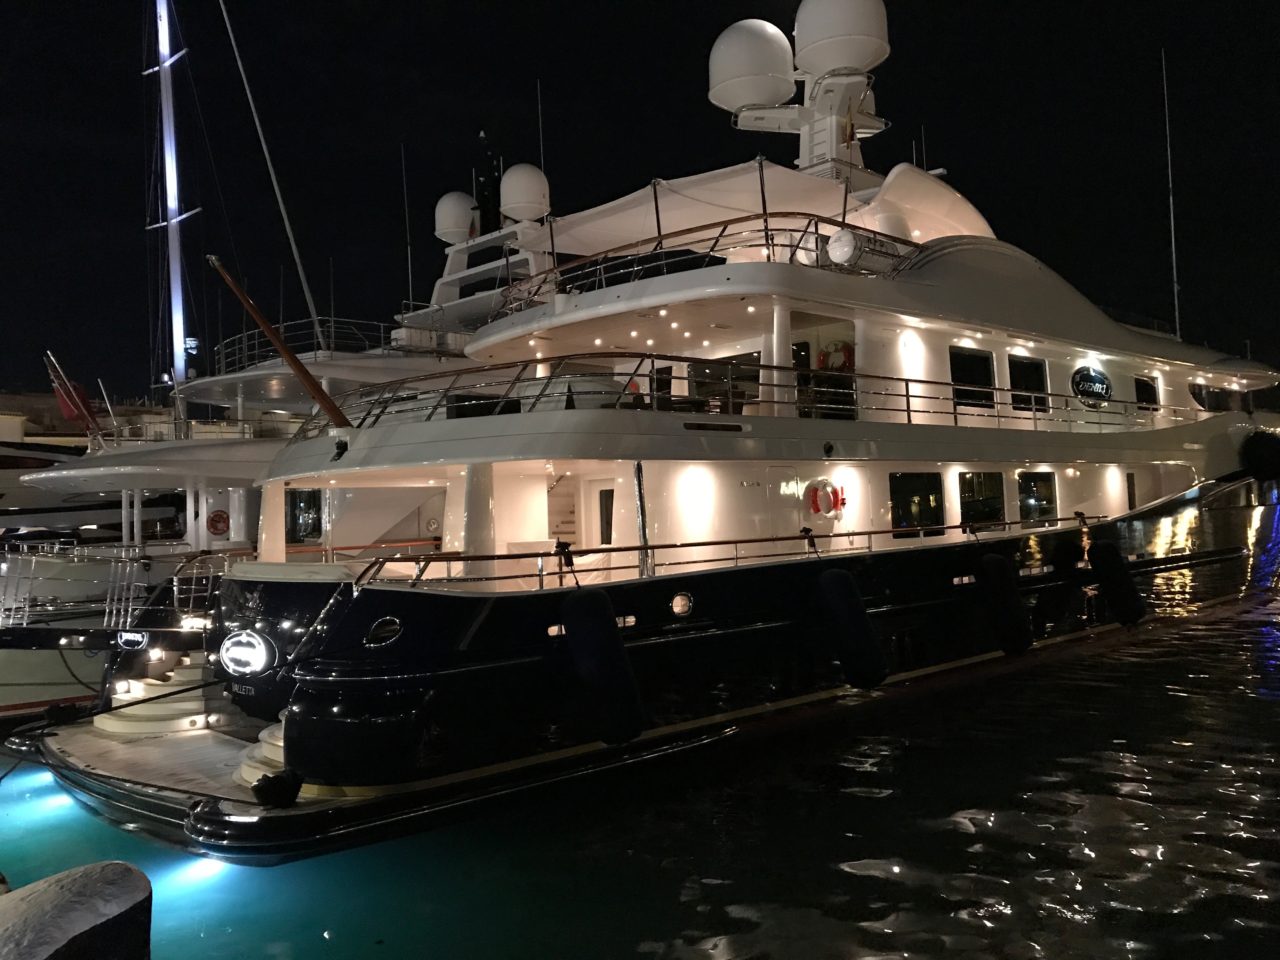 Expensive Luxury Yacht With Lit Lights In Harbor